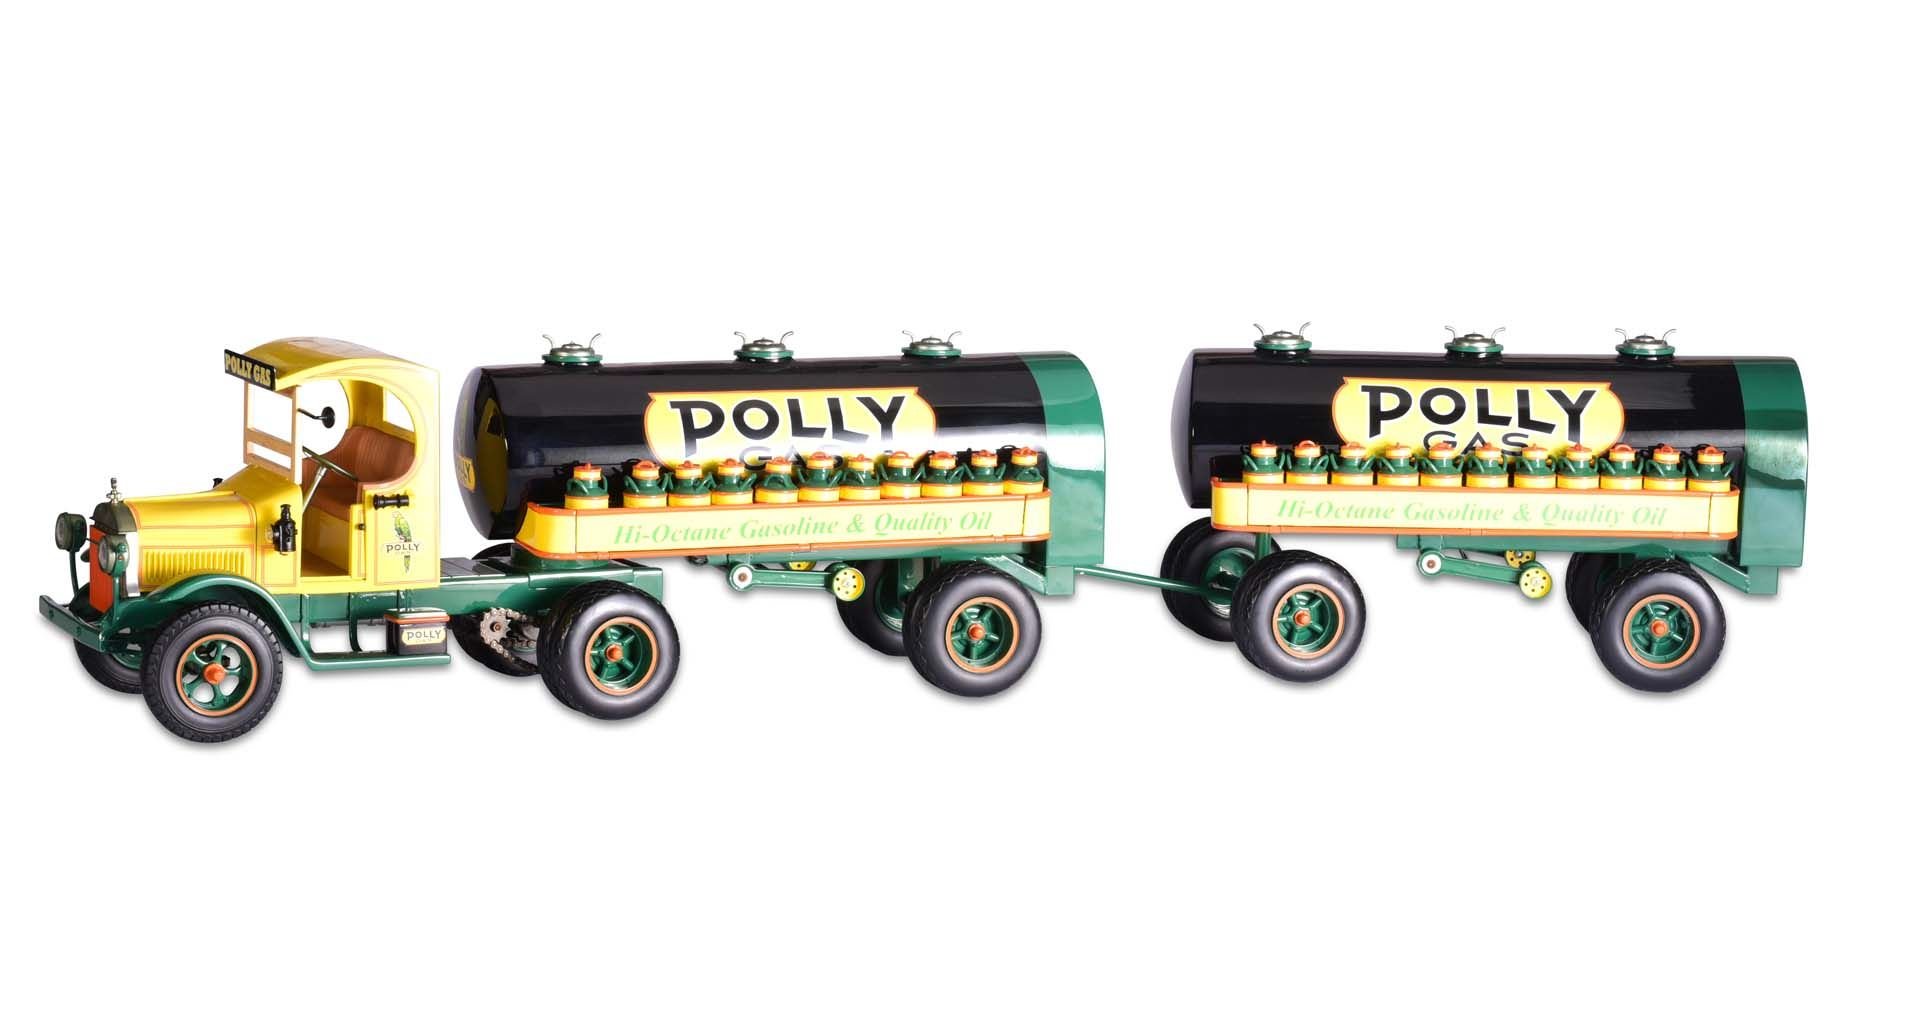 For Sale 'Polly Gas' Double Tanker Semi Truck